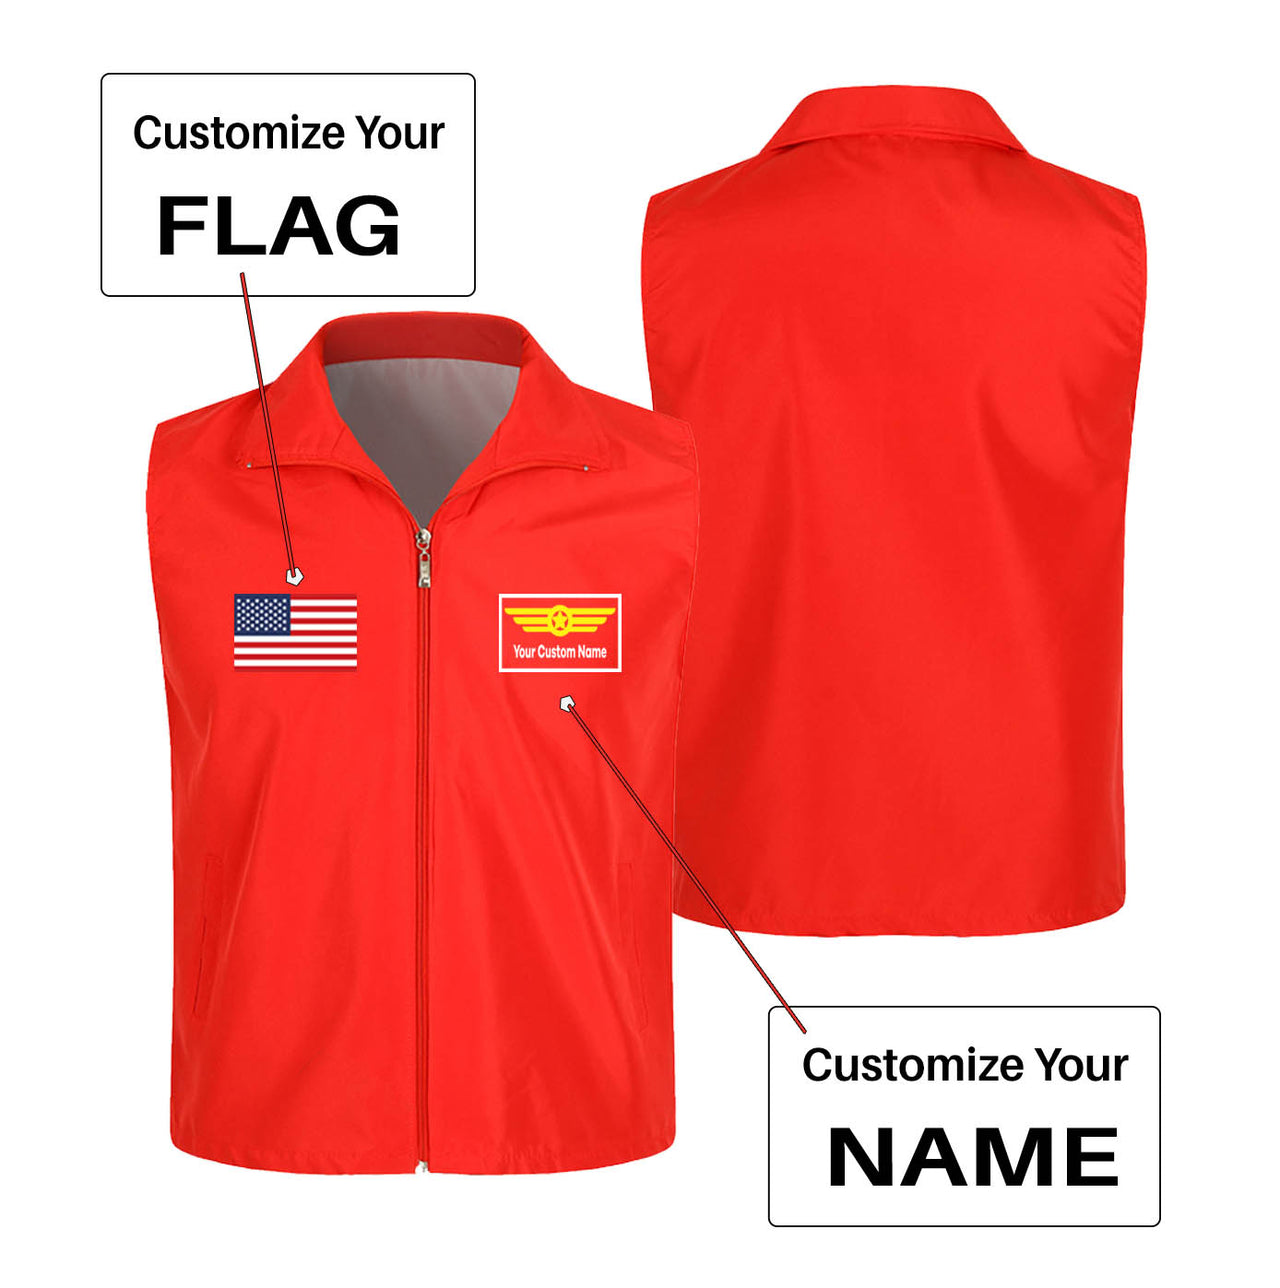 Custom Flag & Name with "Badge 1" Designed Thin Style Vests